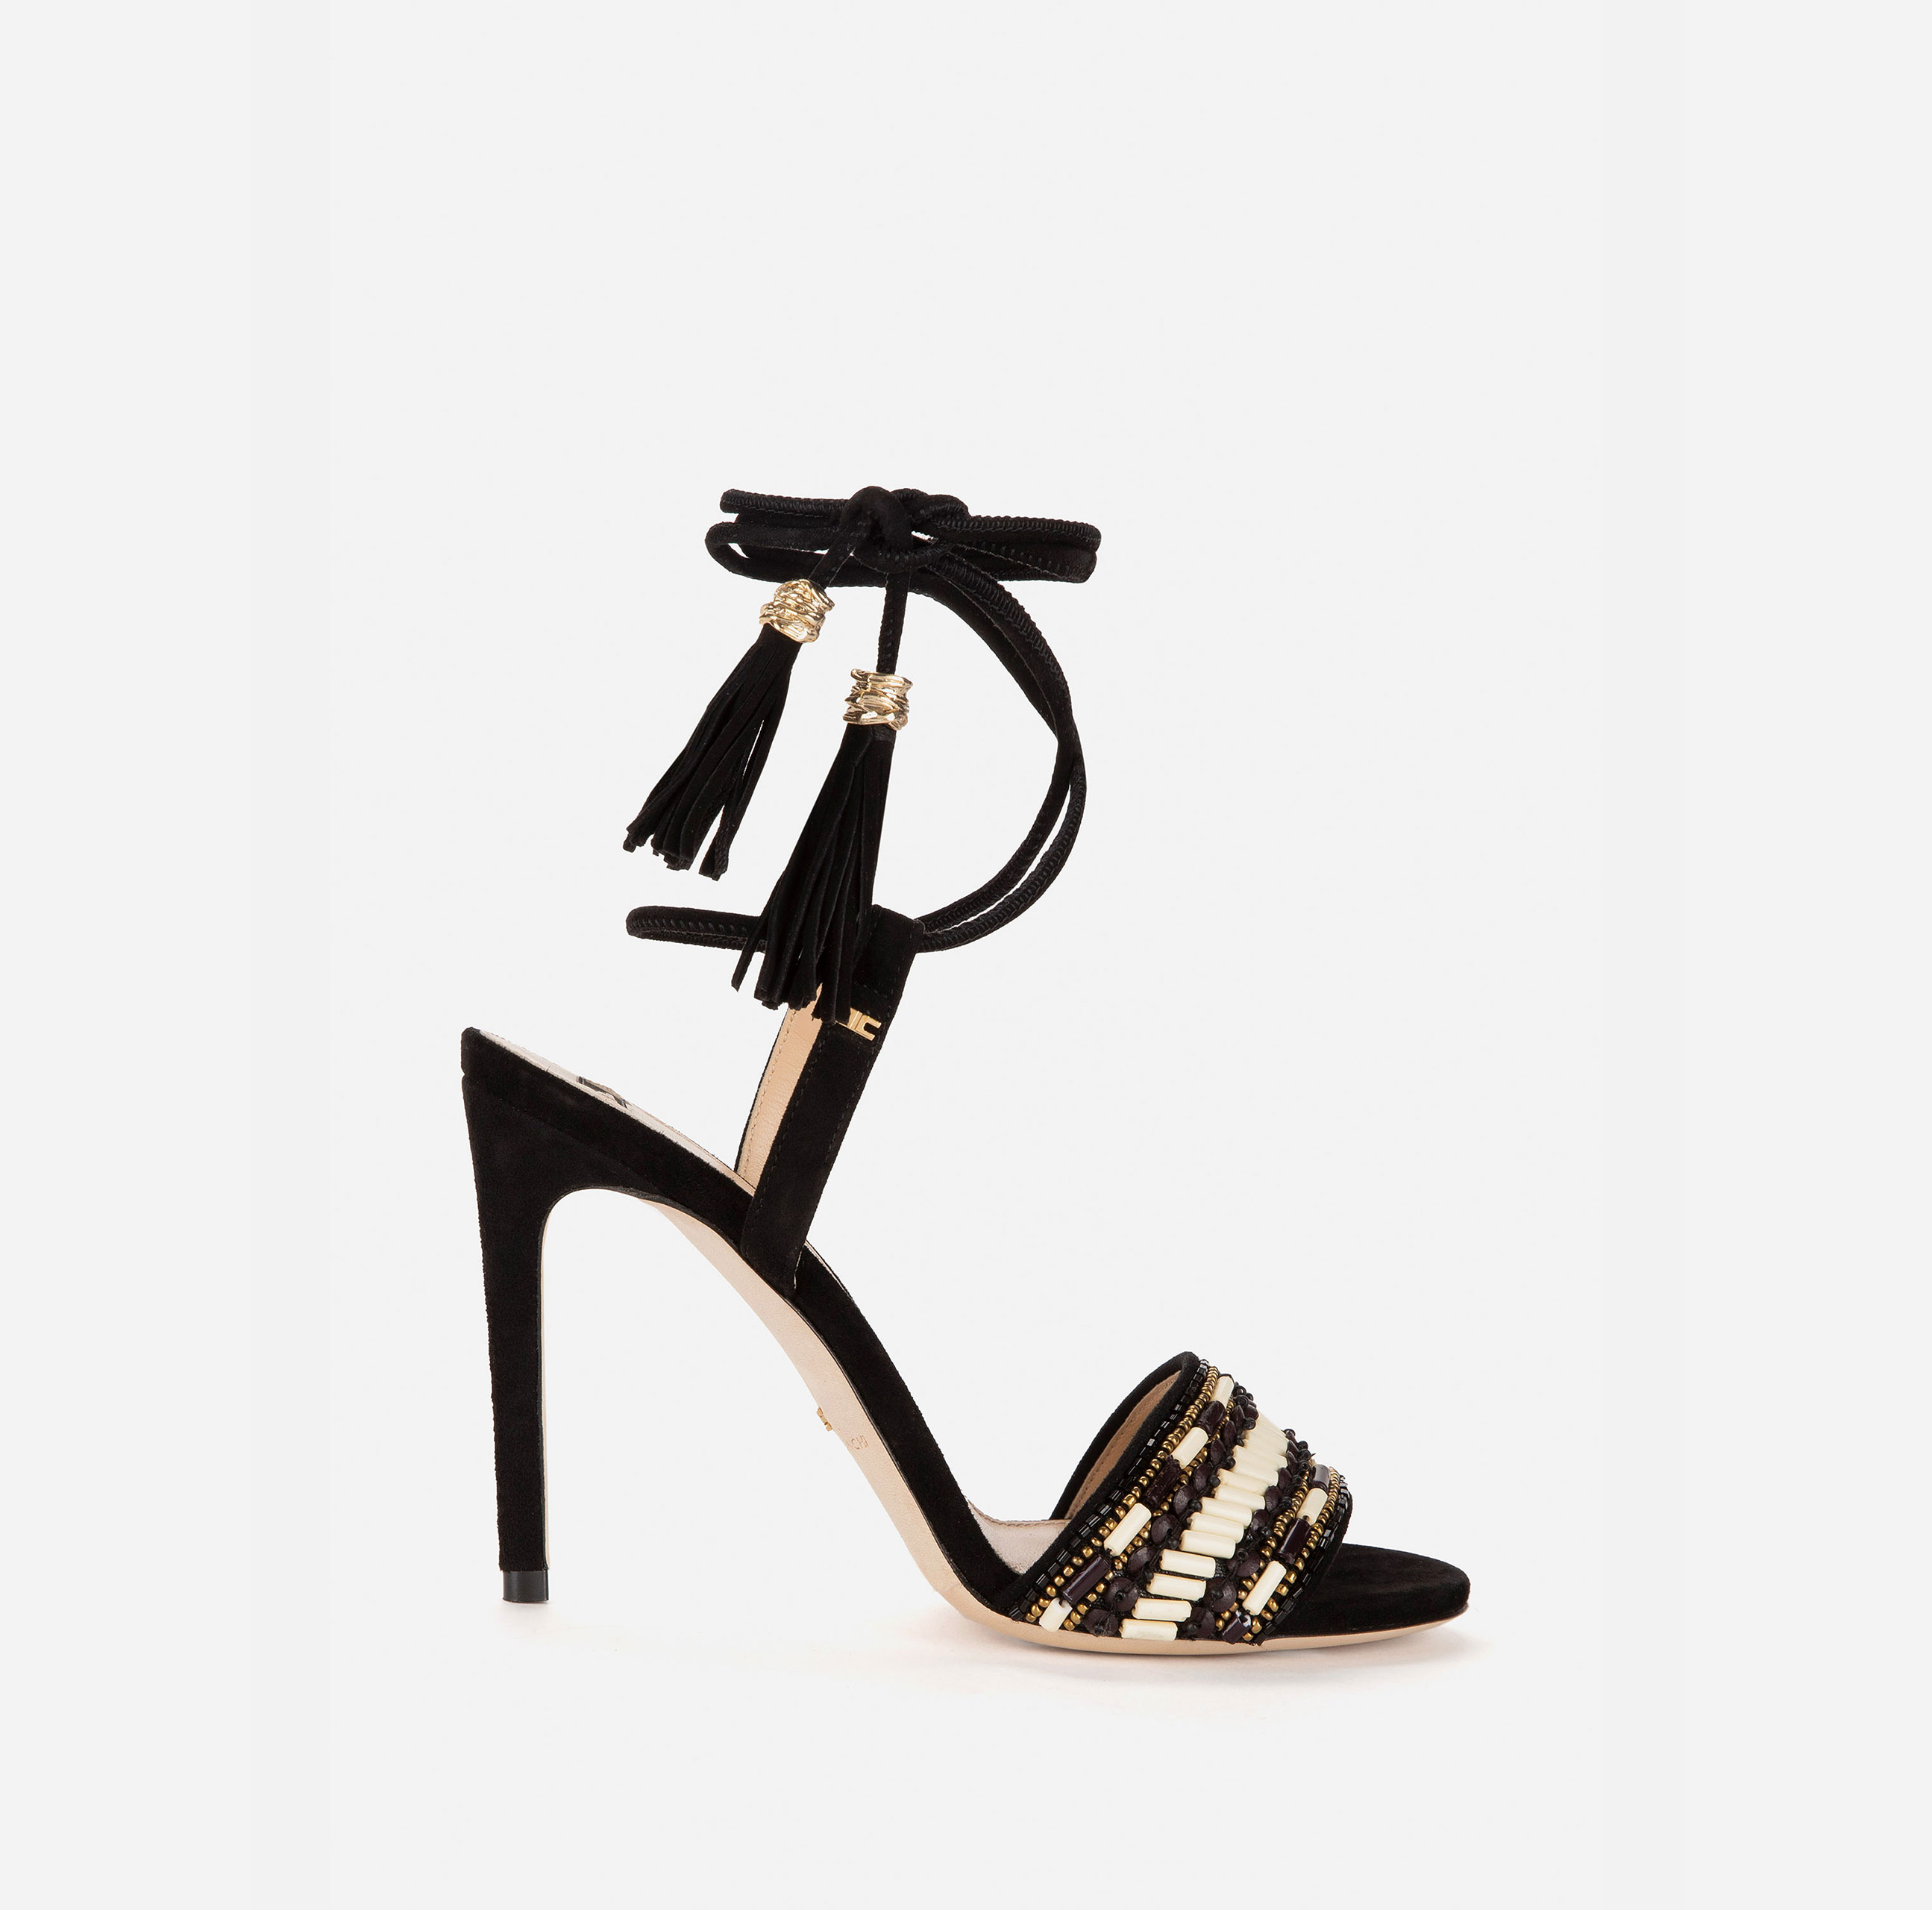 Sandal with embroidered front - Elisabetta Franchi